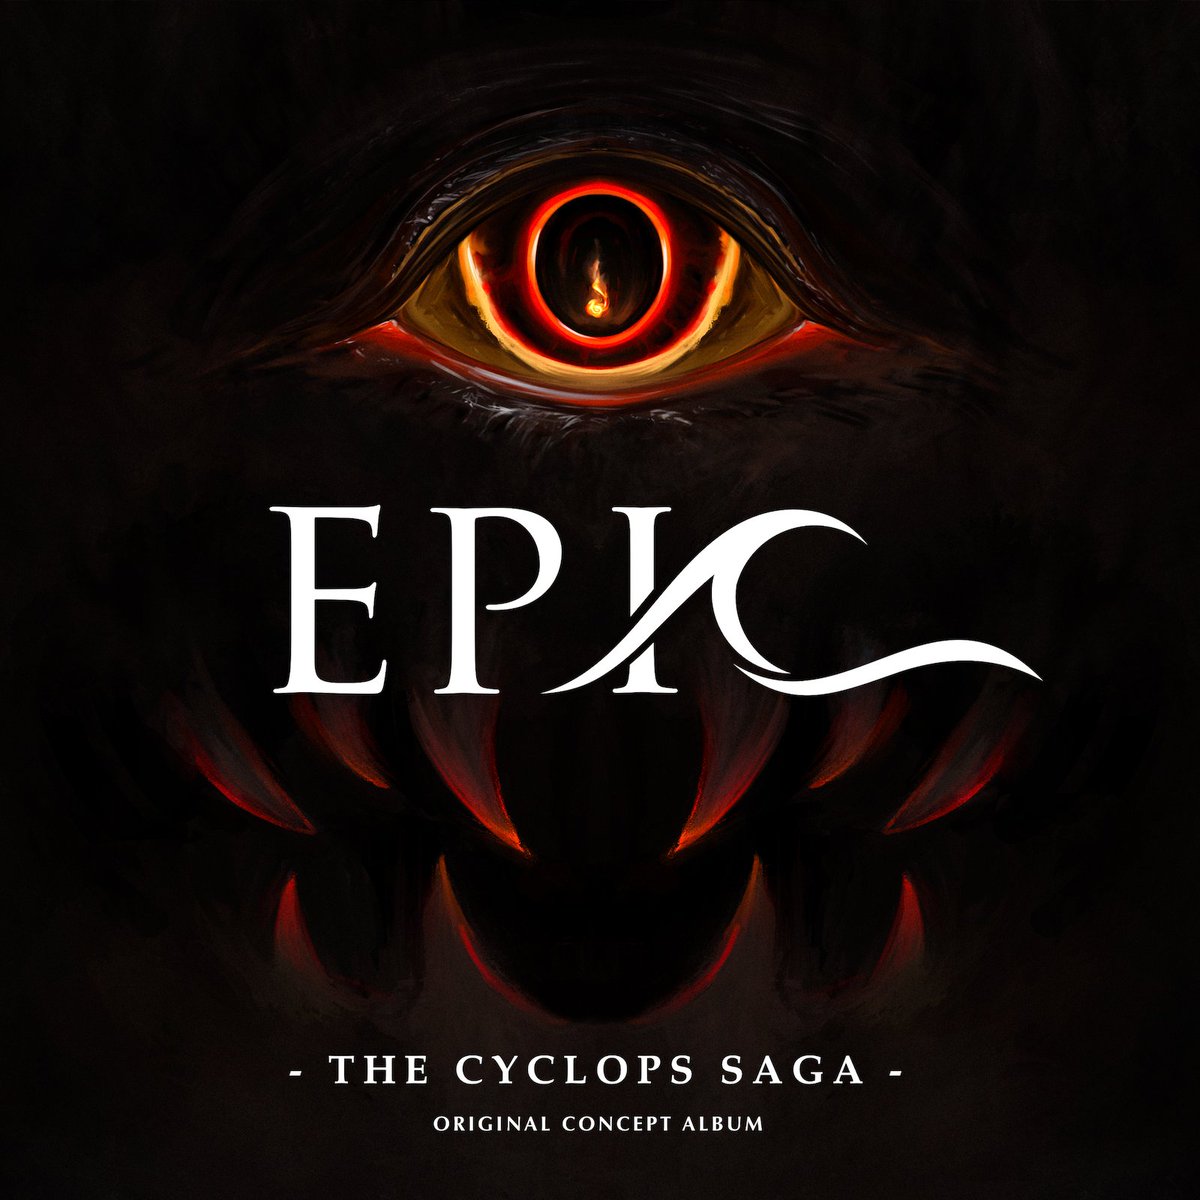 EPIC: The Cyclops Saga is out now! lnk.to/cyclopssaga